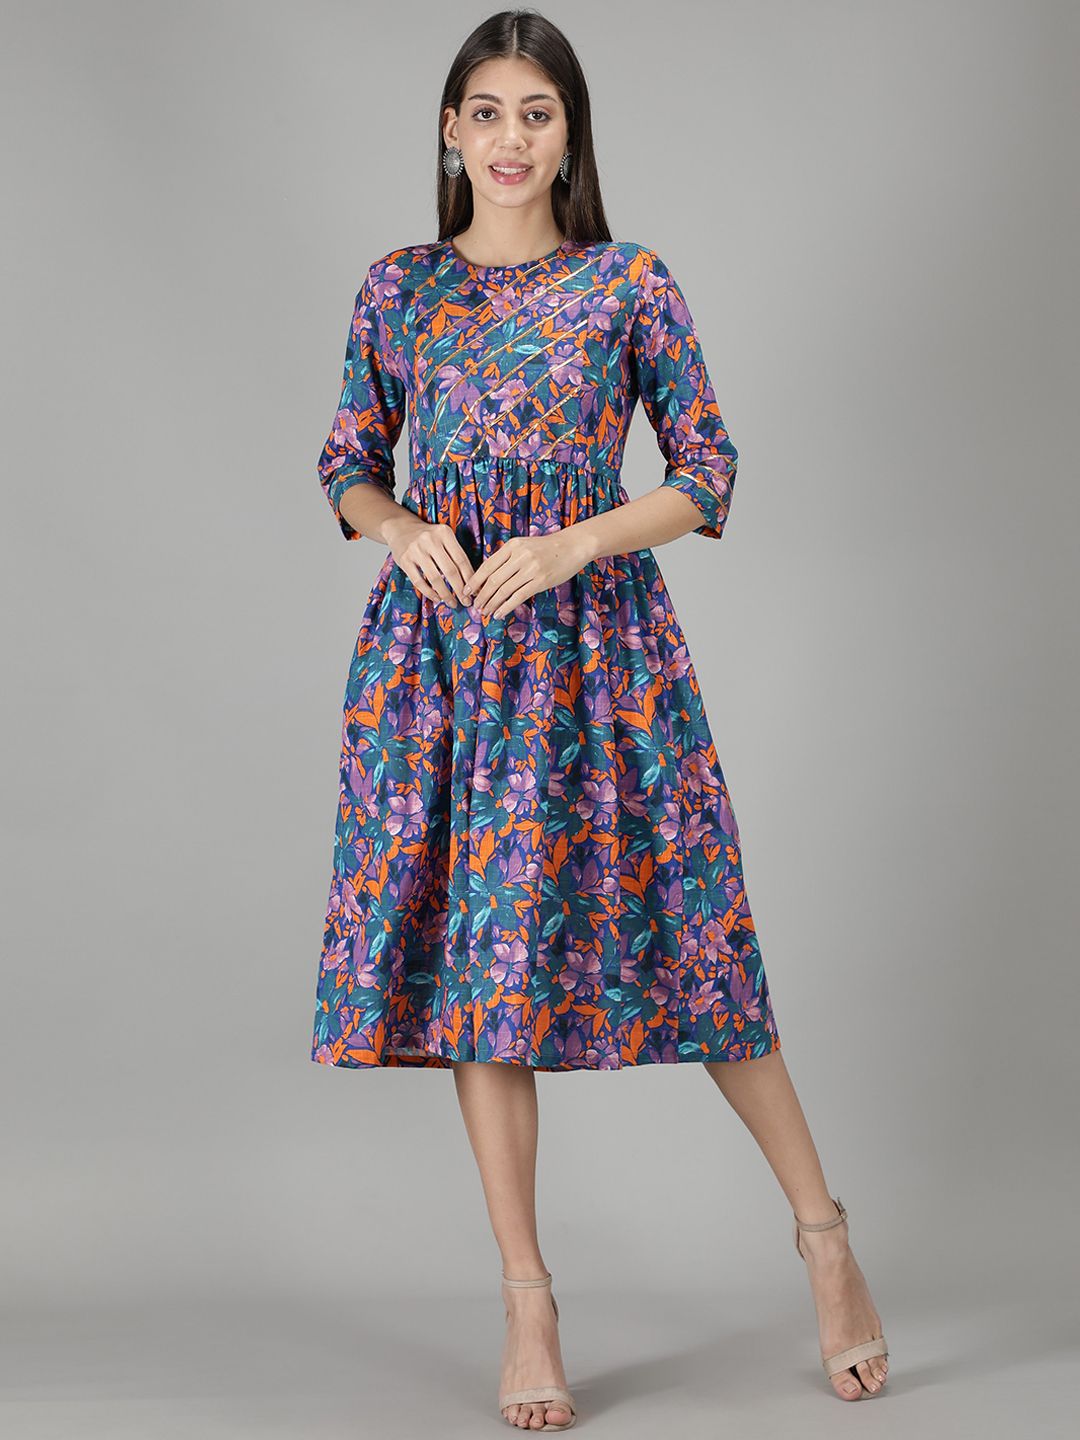 Cot'N Soft Teal & Violet Floral Printed Cotton A-Line Dress Price in India